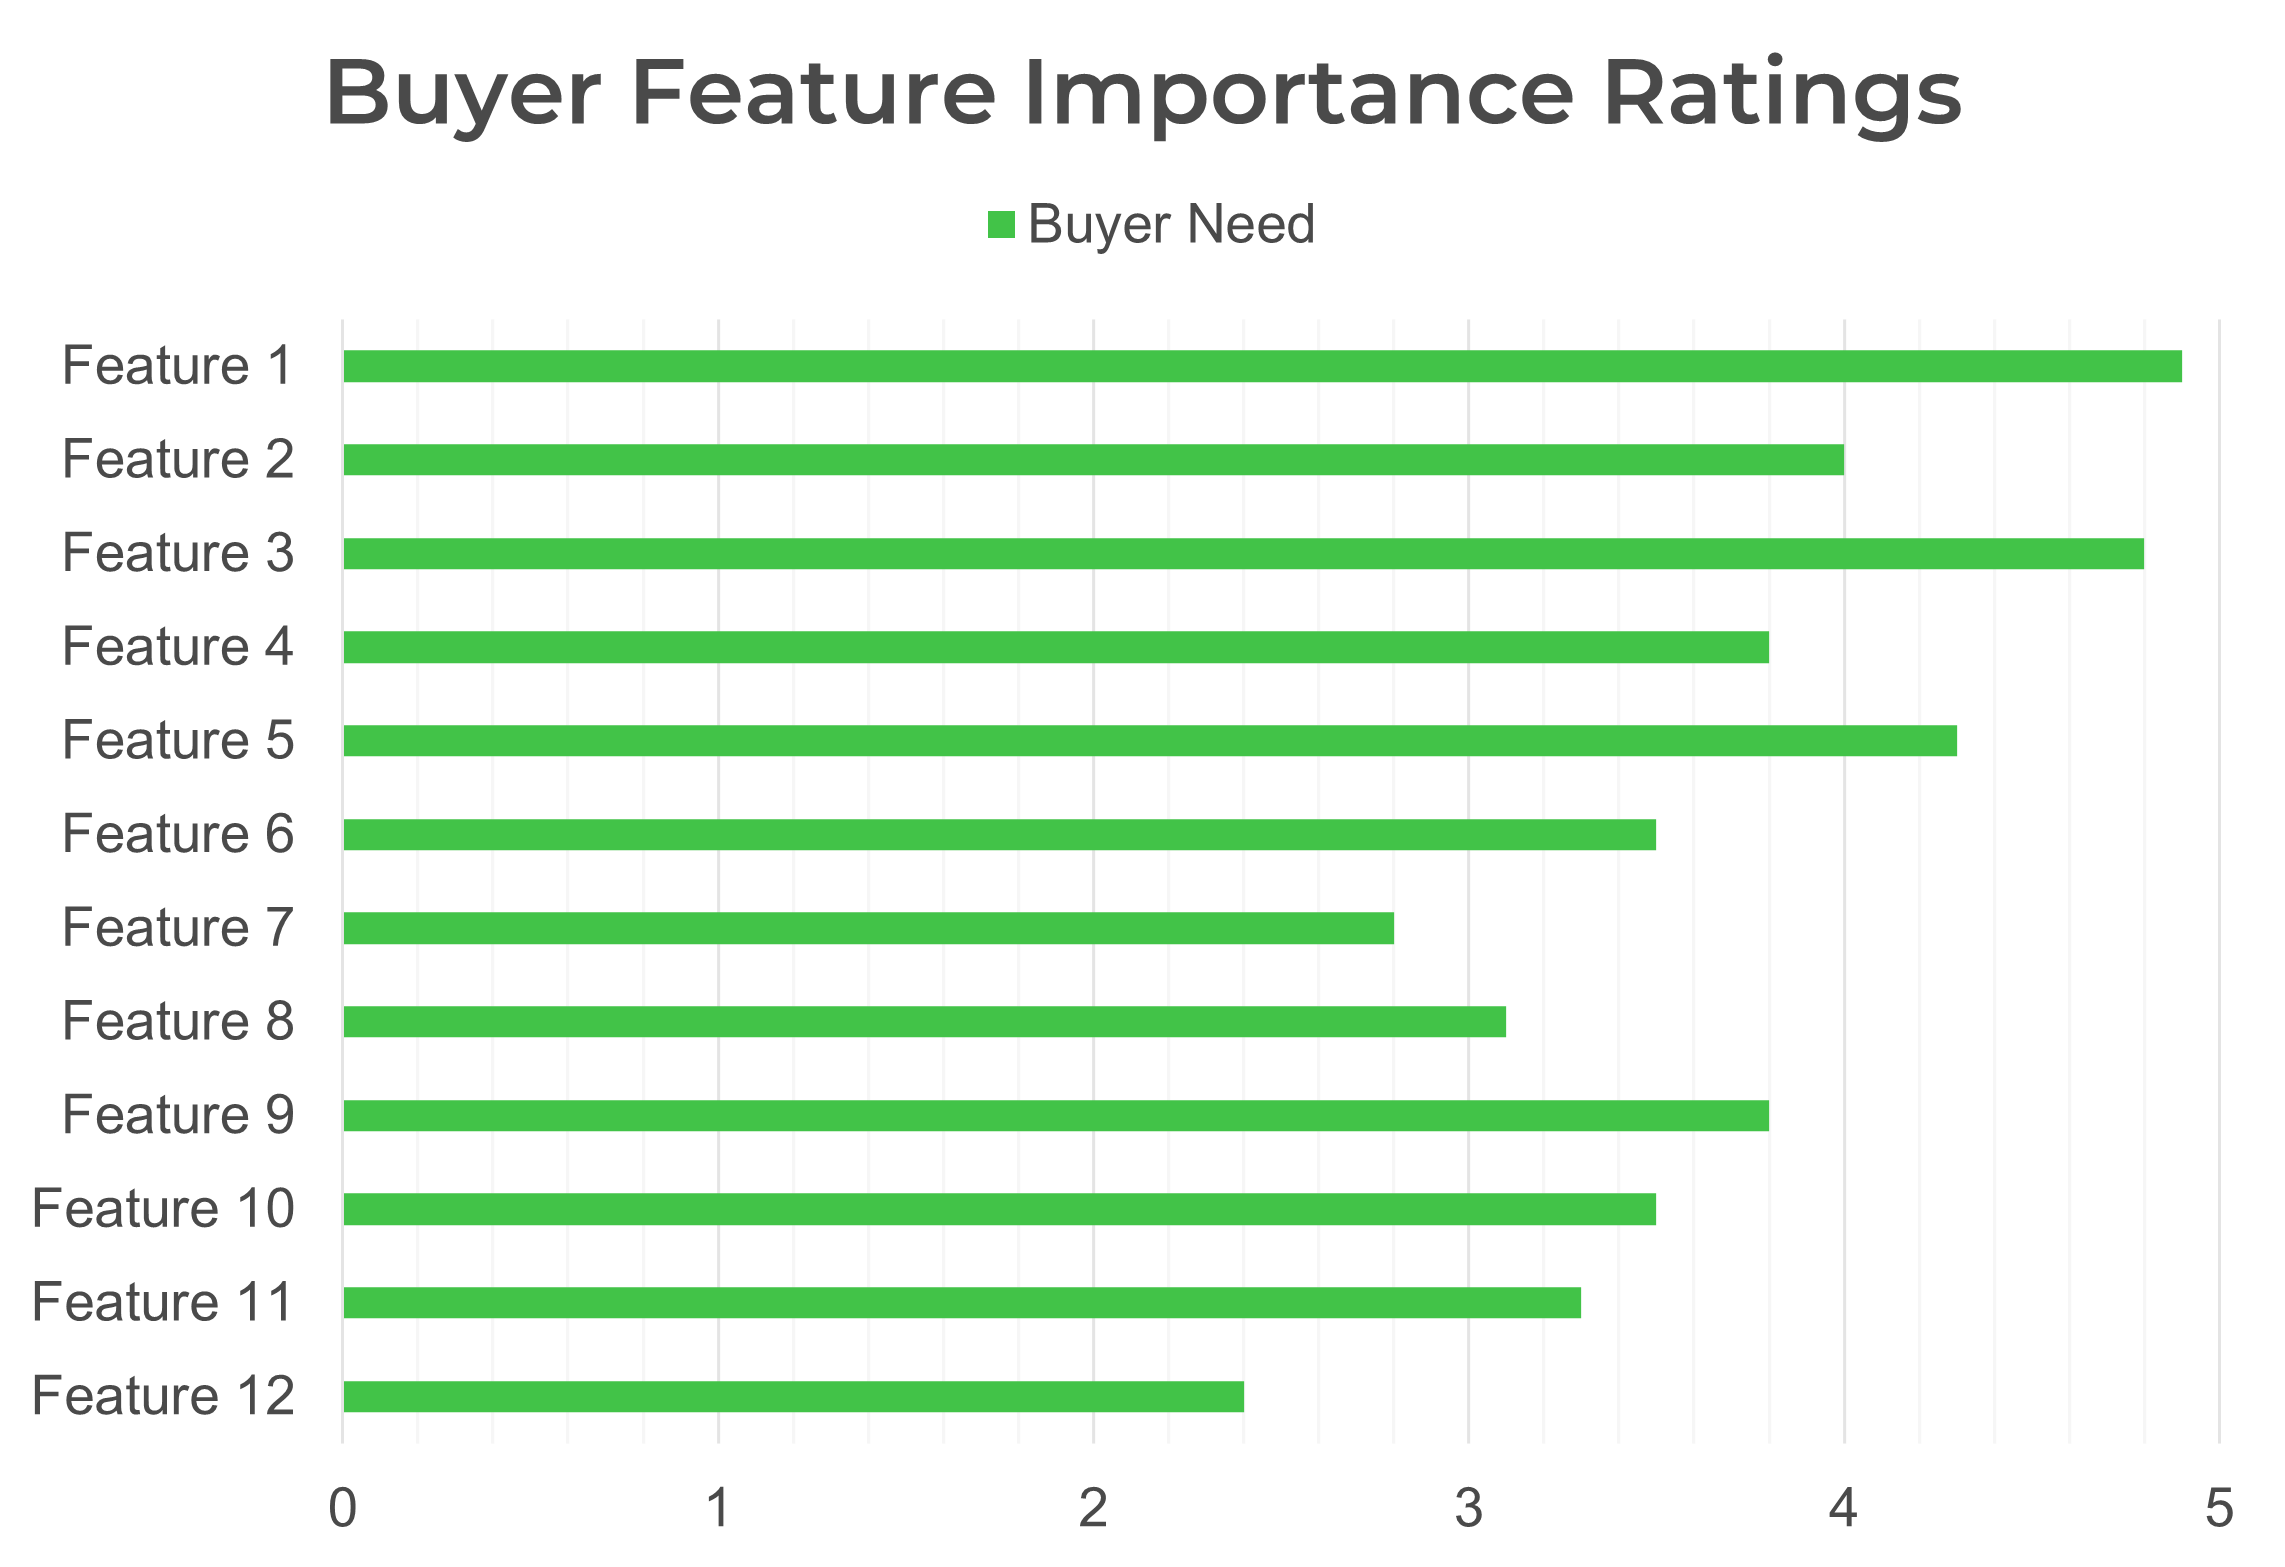 Example bar chart for 'Buyer Feature Importance Ratings' where 'Buyer Need' is rated for each 'Feature'.